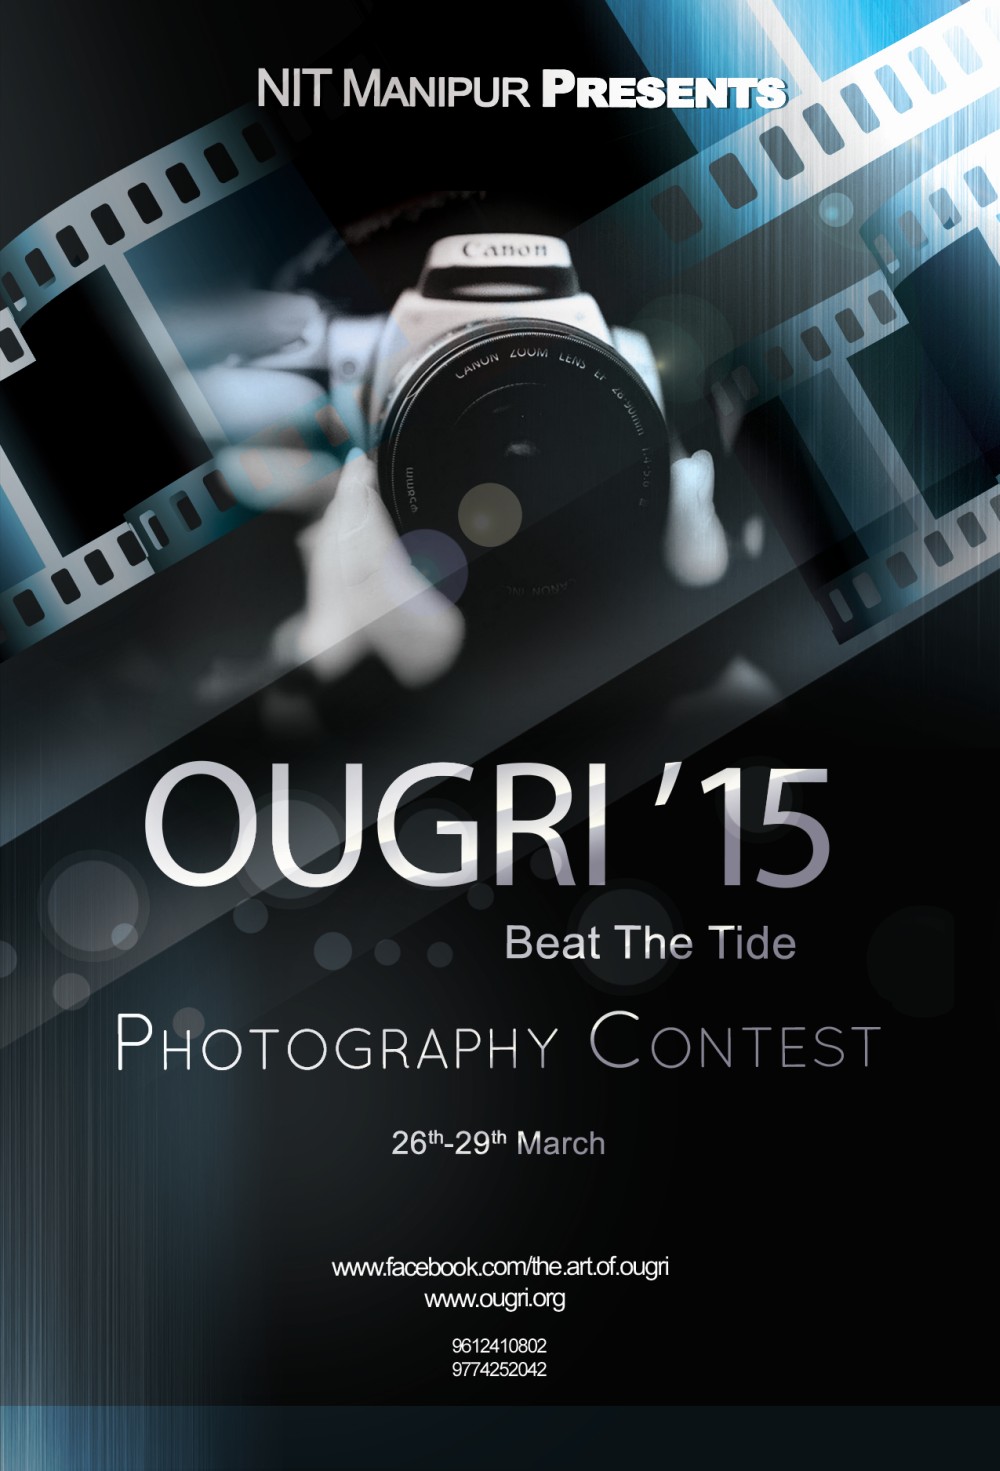   Photography Competition : Ourgri '15 at NIT Manipur  